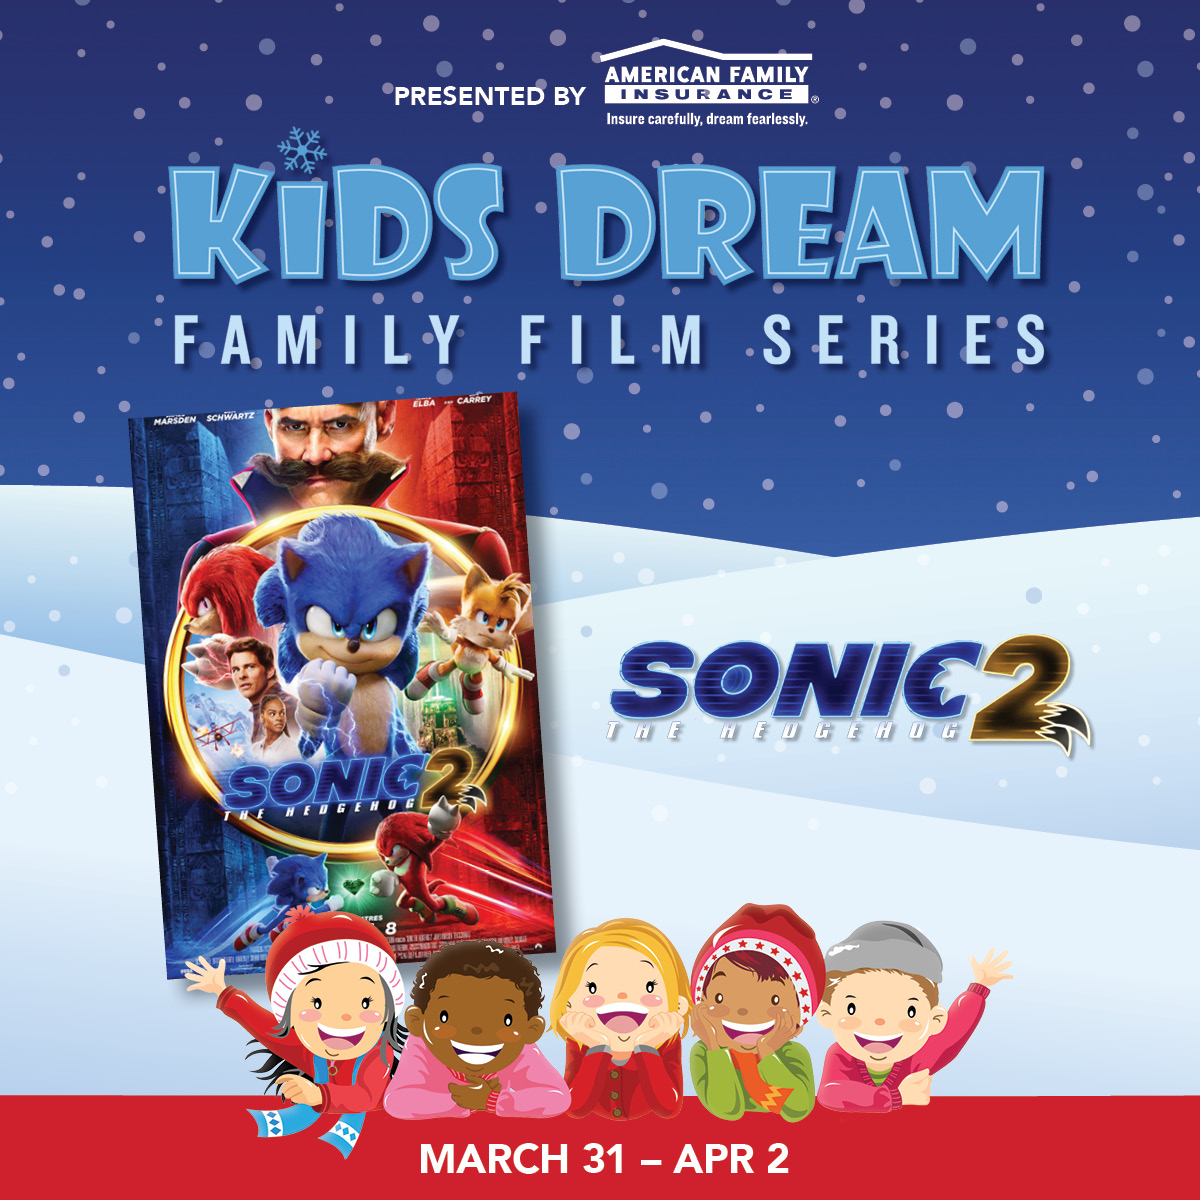 Don’t blink. You might miss it! Sonic the Hedgehog 2 is back at Marcus Theatres March 31 – April 2 as the last movie of our #KidsDreamFilmSeries, presented by American Family Insurance. Free tickets here https://t.co/qm58hPdlAM https://t.co/8zkjghe1Qo